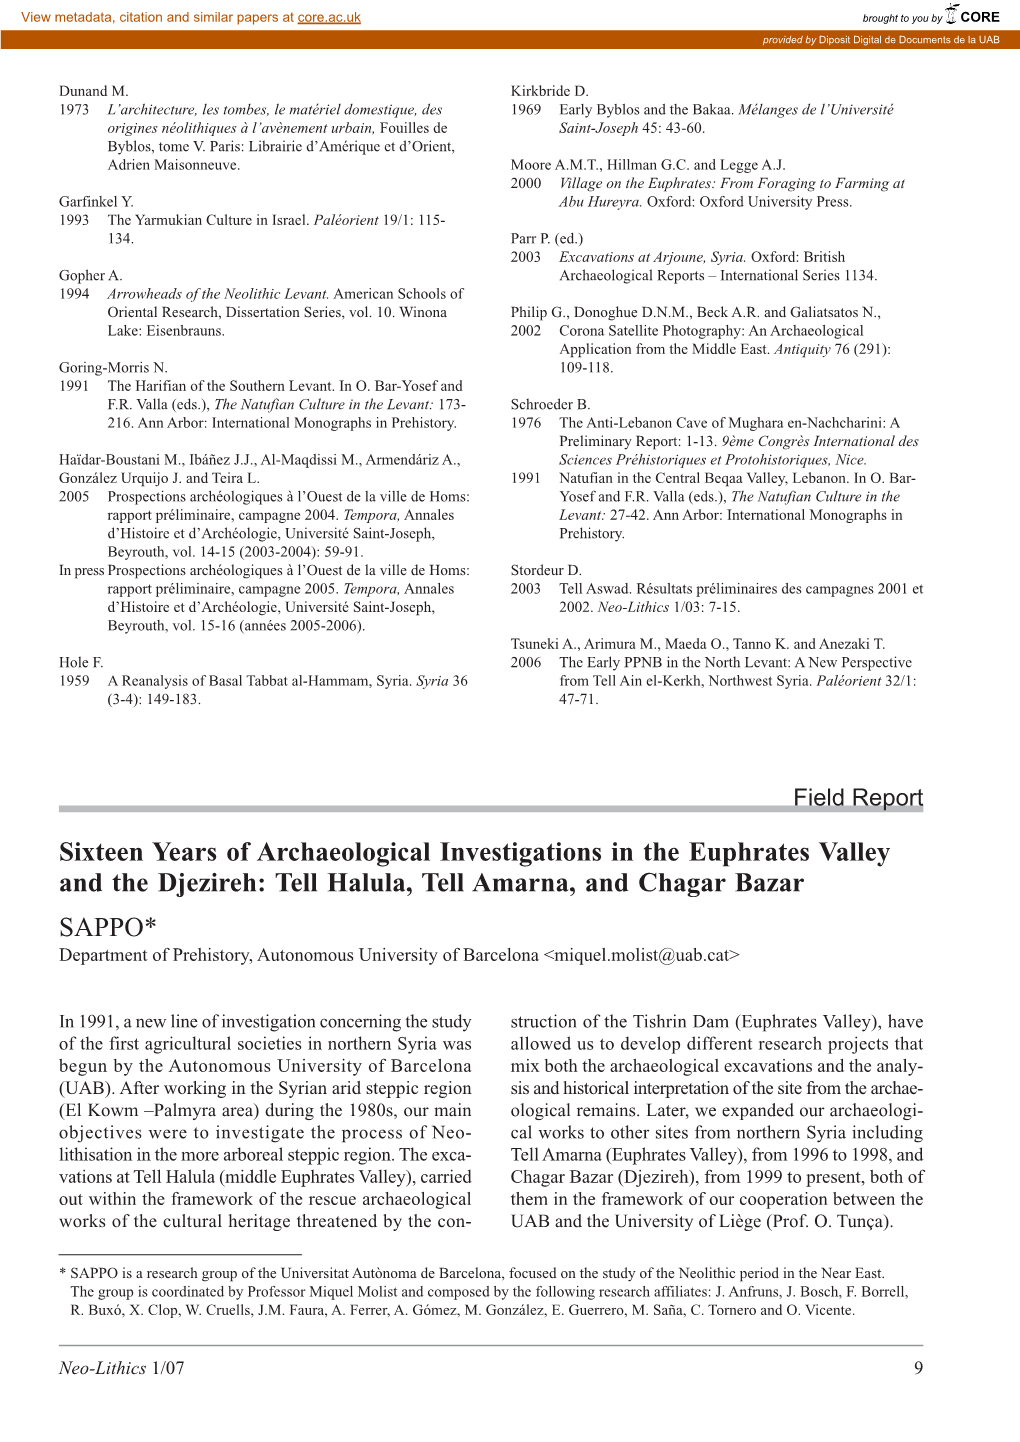 Sixteen Years of Archaeological Investigations in The